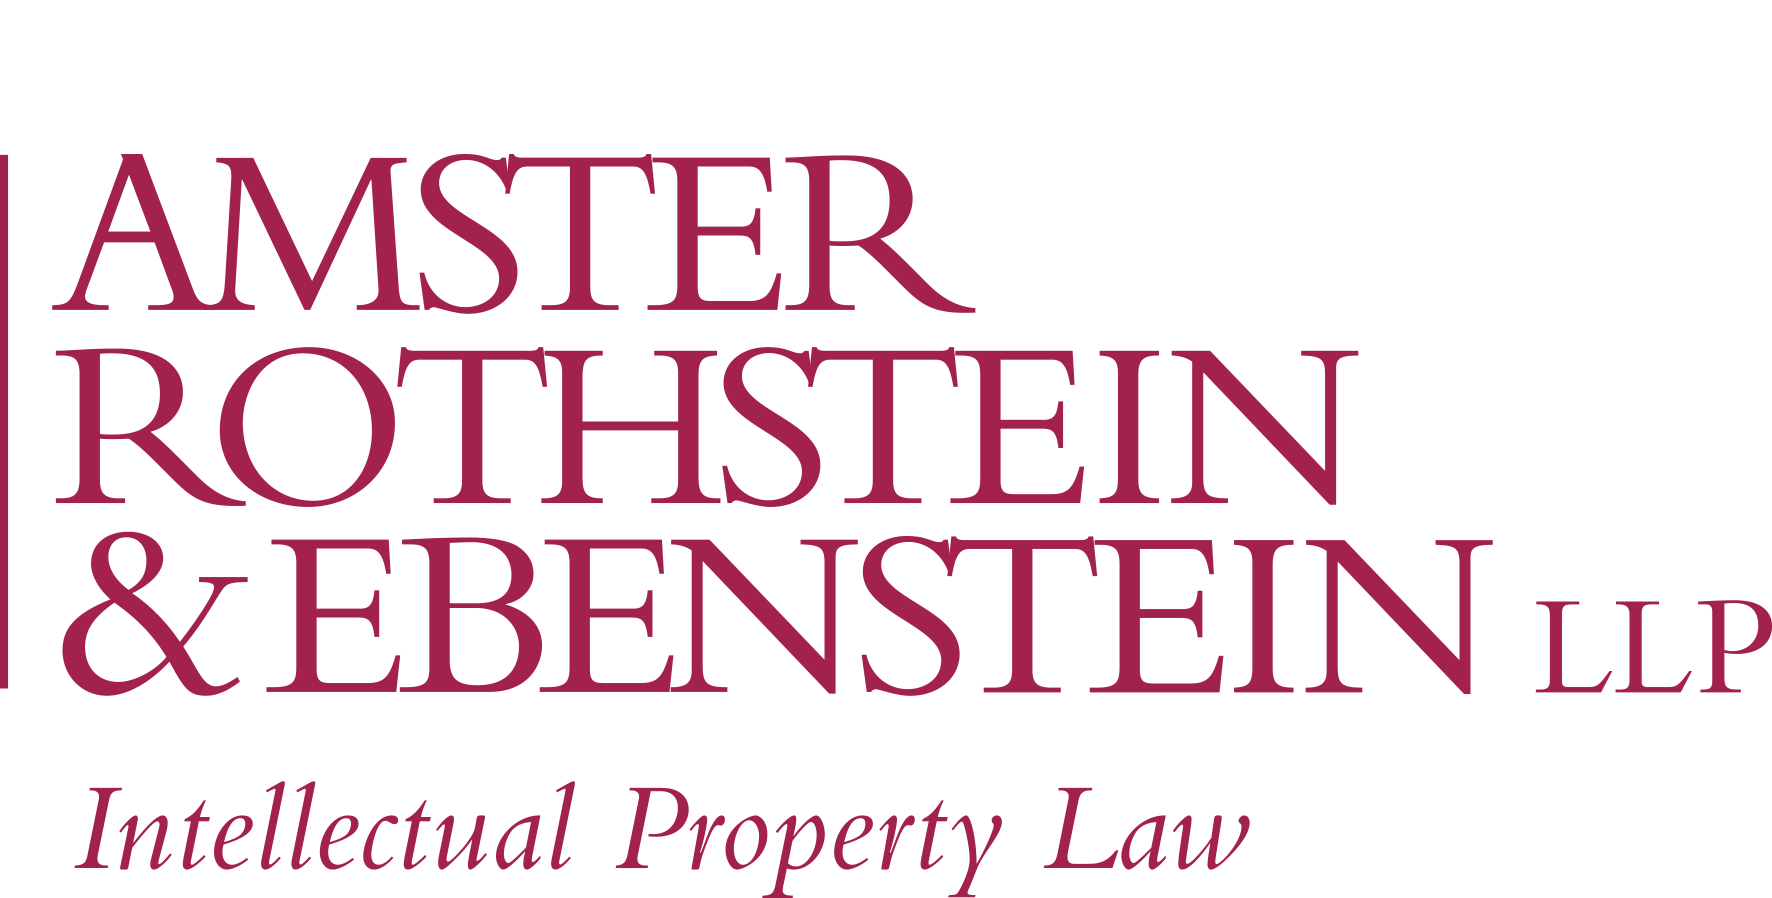 Amster Rothstein and Ebenstein, LLP - Intellectual Property Law